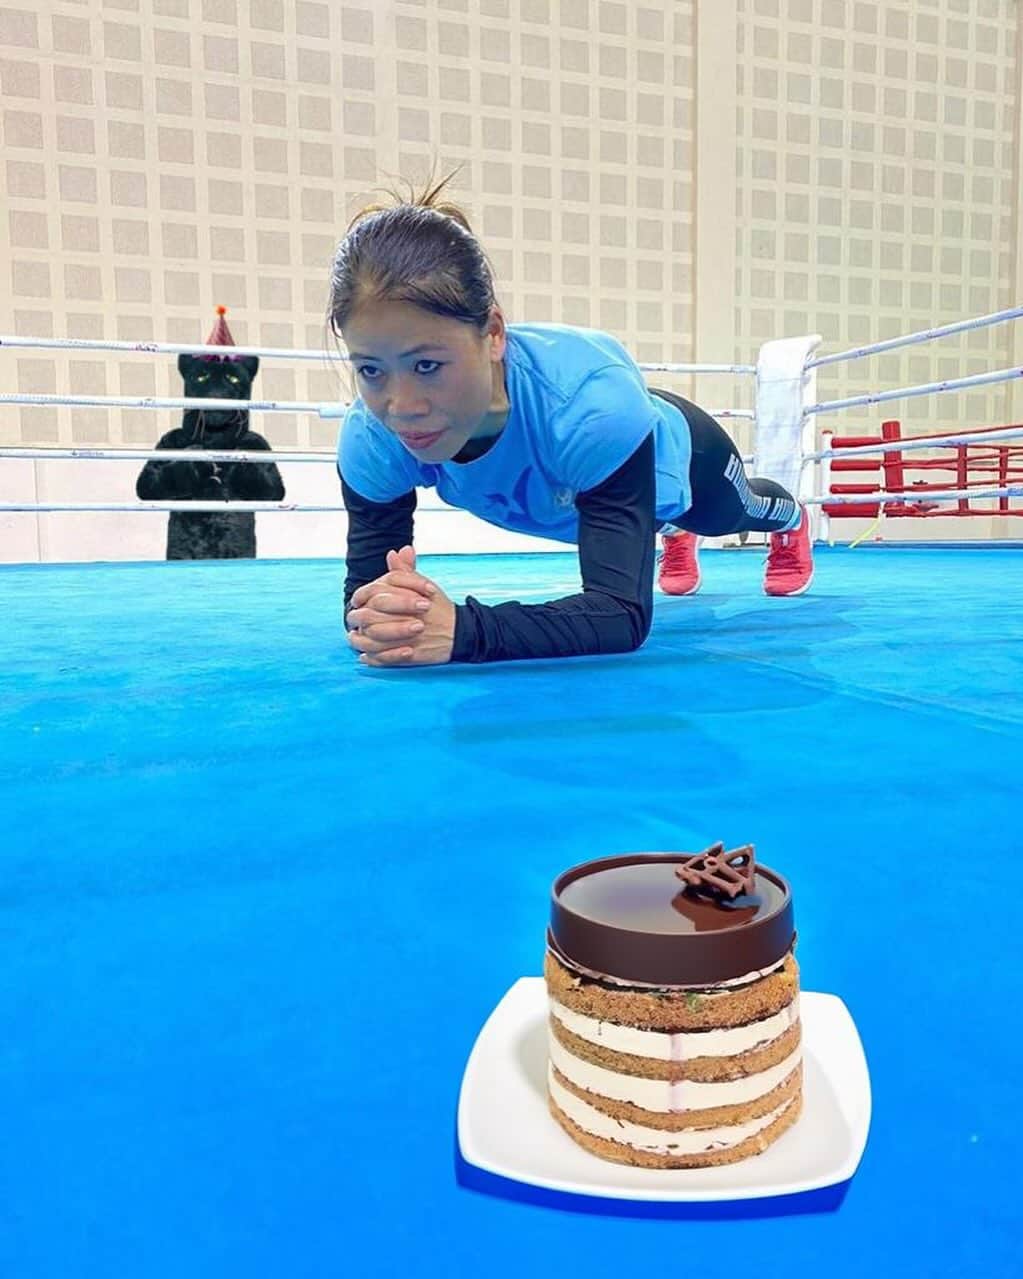 Mary Komのインスタグラム：「@pumaindia , I had to train for a match the next day and still got you a cake 🥊 How can you forget?   Attend the PUMA Birthday Bash this year at PUMA.com, App & Stores. Grab some birthday treats & special return gifts too 🎁   #PUMABirthdayBash」